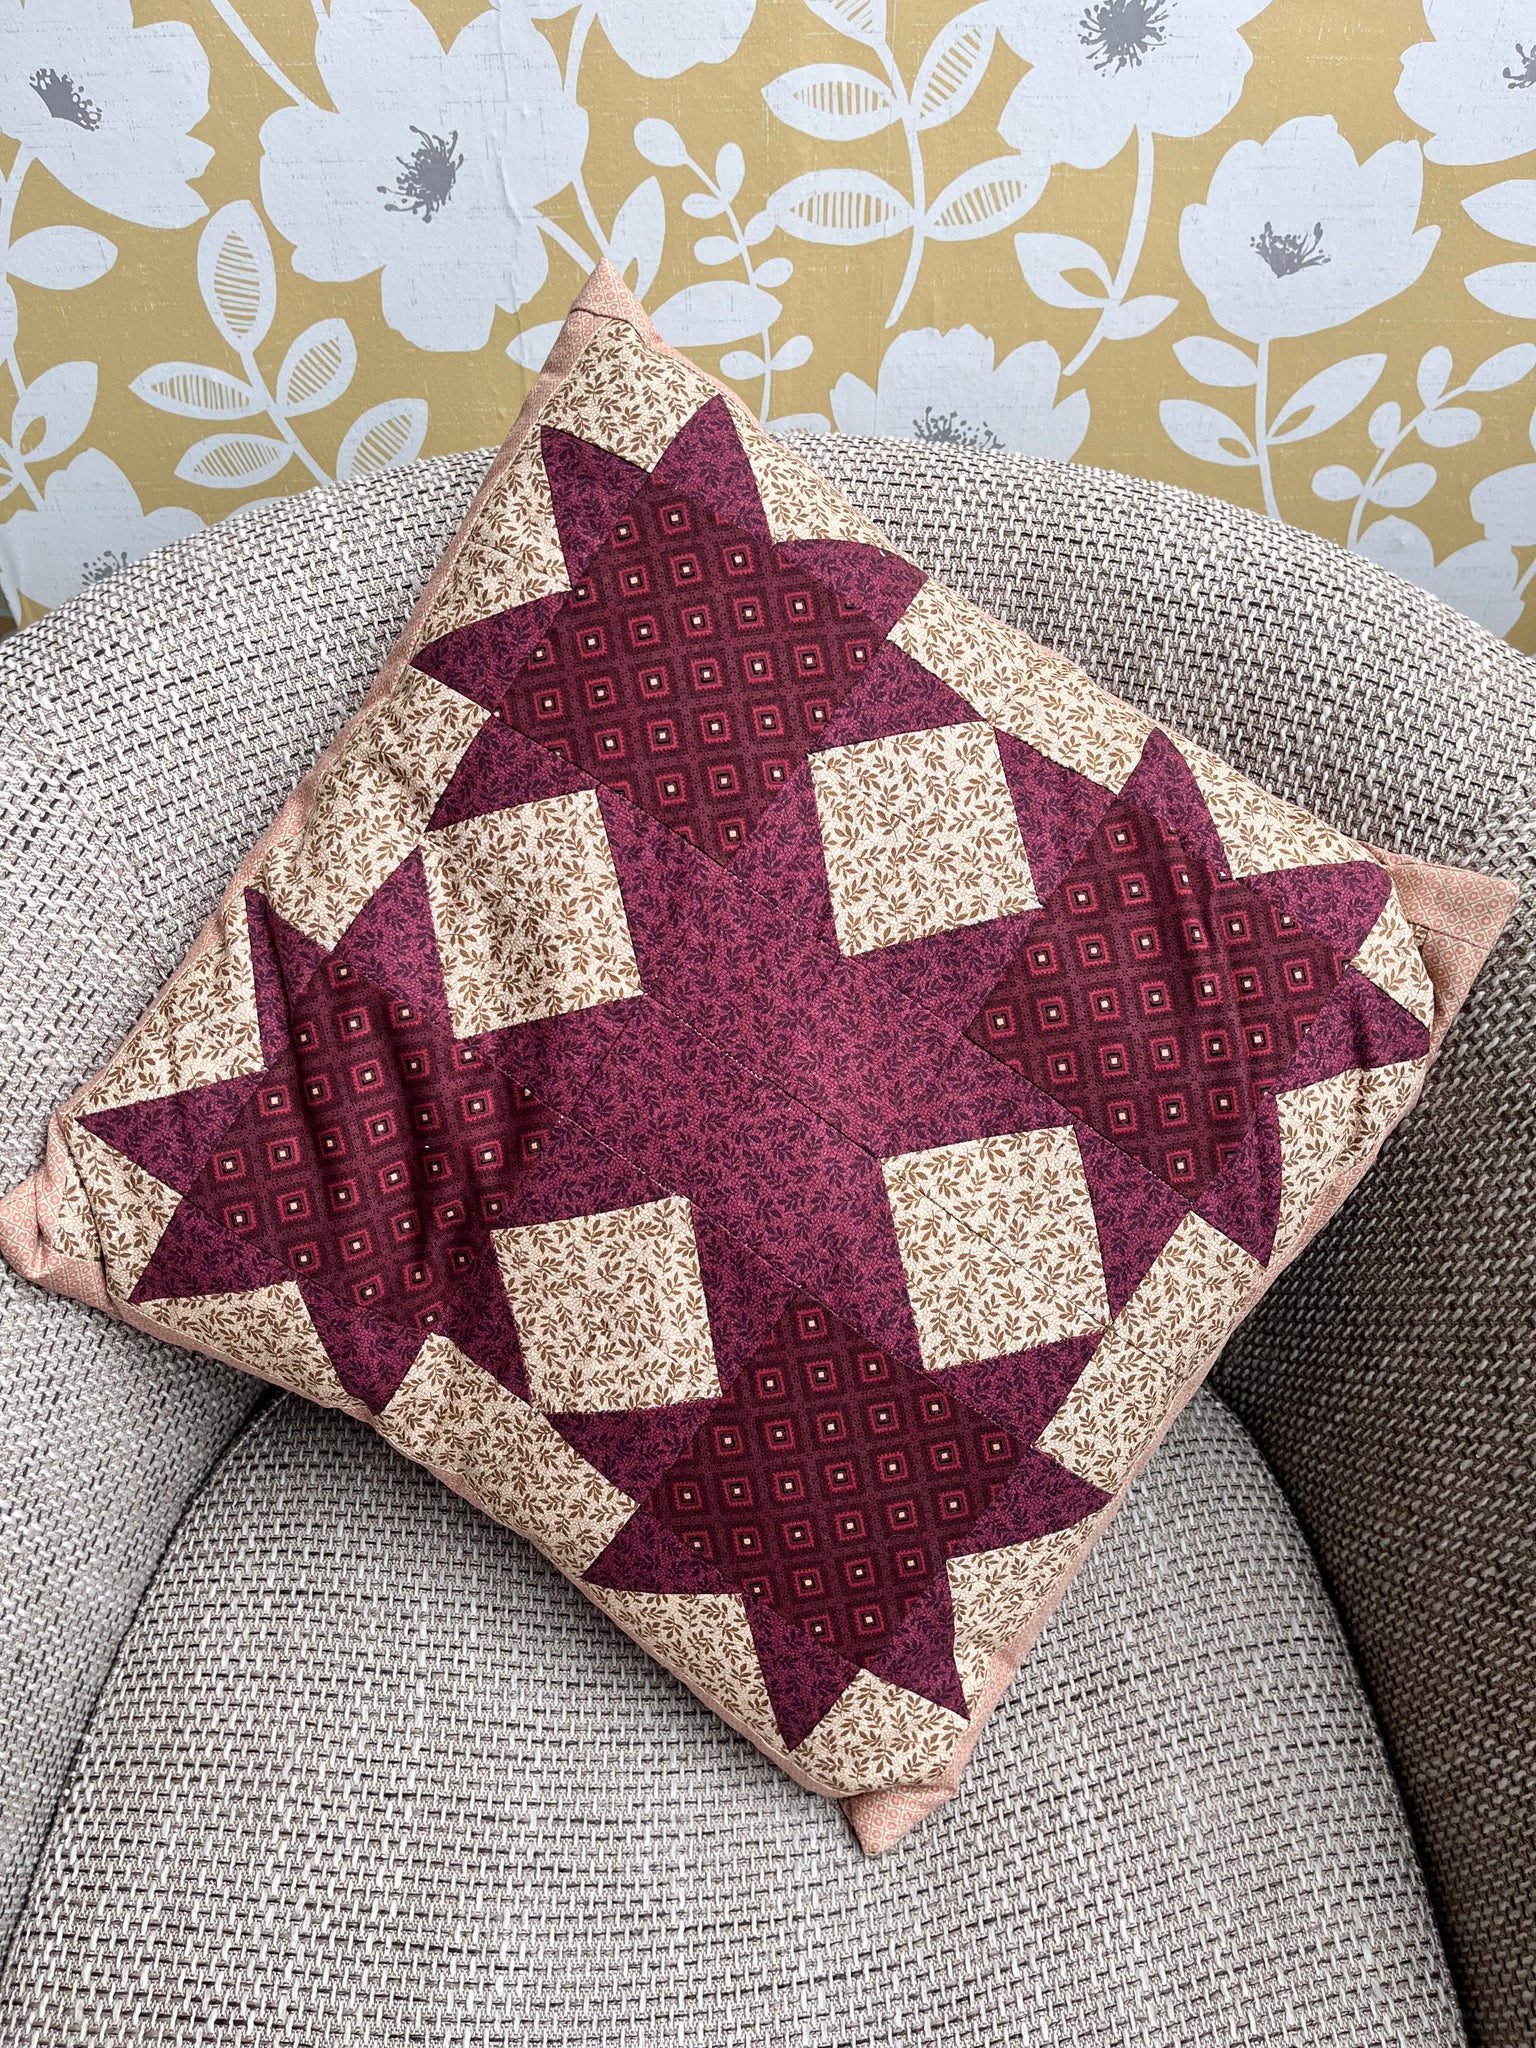 REDUCED TO £9.25 -Prickly Points Cushion Cover - Ready Made 18" x 18"